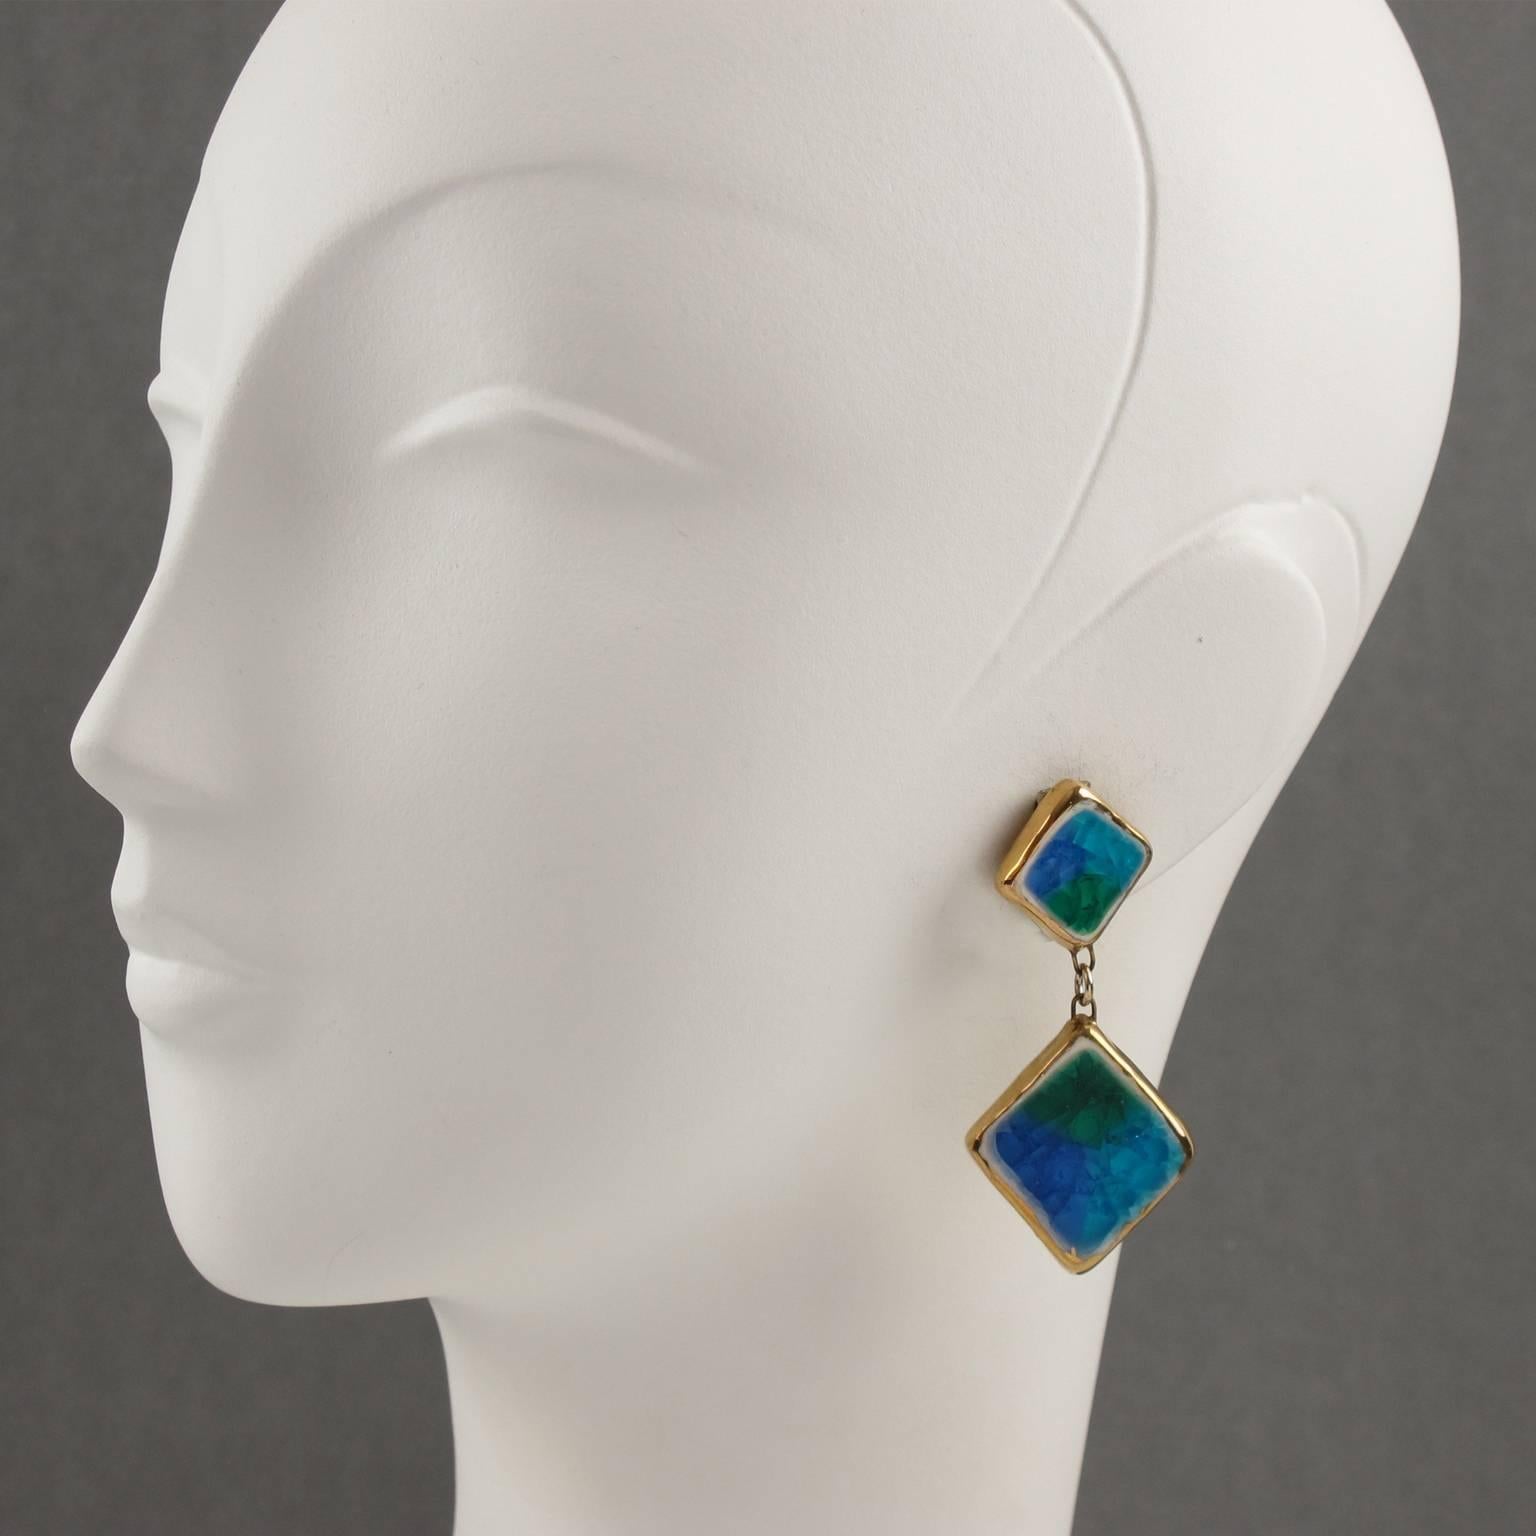 Rare Italian Mid-Century Modern clip on earrings. Featuring rectangular ceramic elements, dangling shape, with gilt enamel and gorgeous blue, turquoise and green glaze, topped with fused crackled glass. Typical Italian ceramic work of the 1960s,